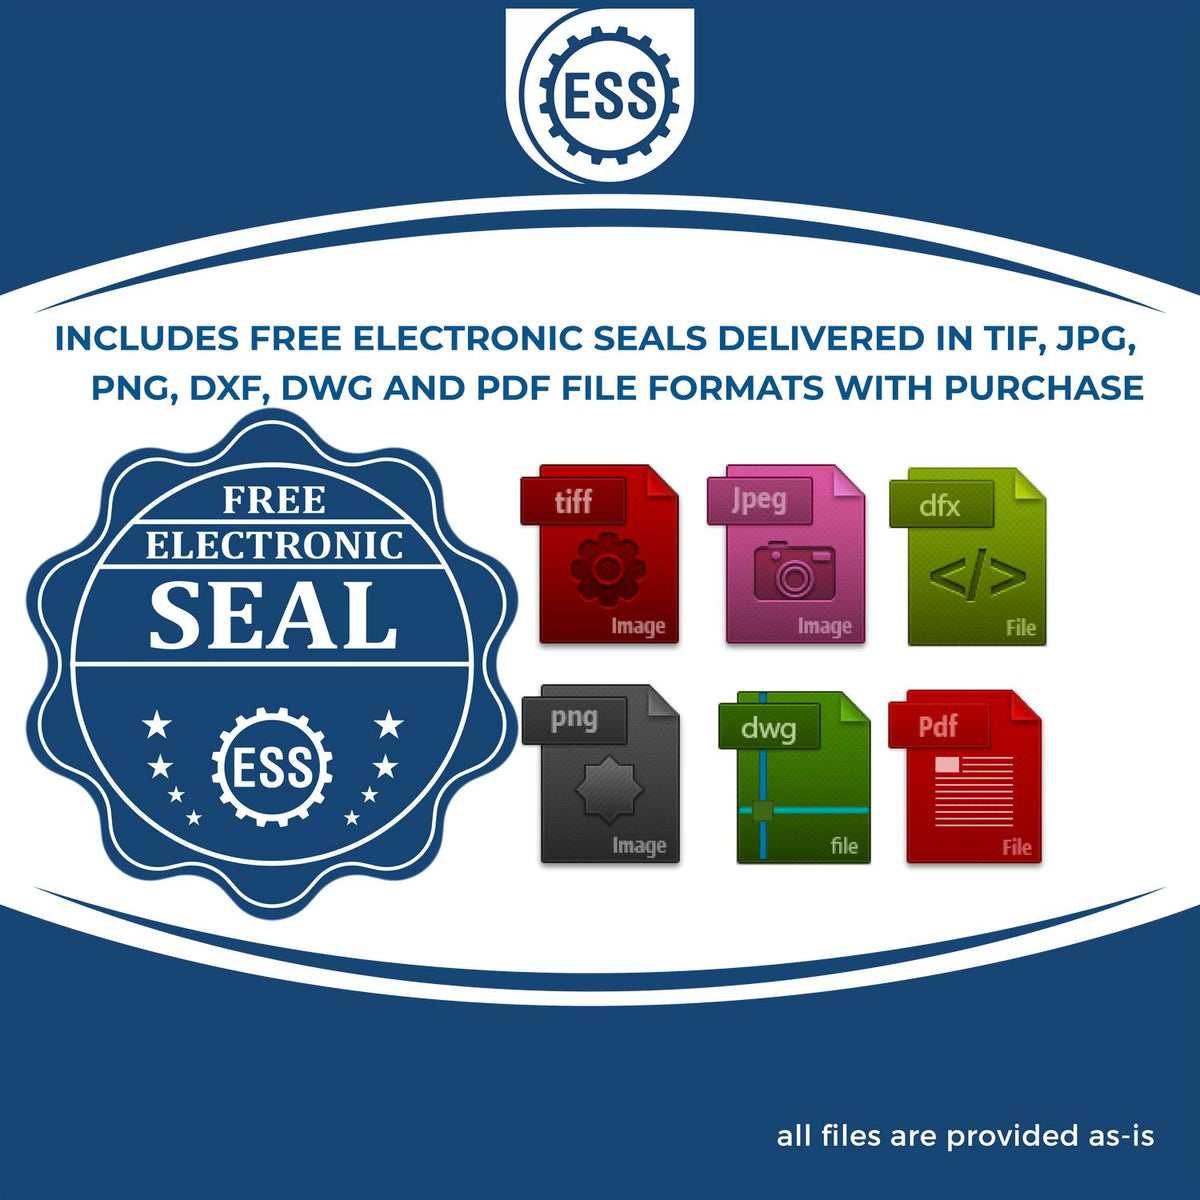 An infographic for the free electronic seal for the Slim Pre-Inked Colorado Professional Geologist Seal Stamp illustrating the different file type icons such as DXF, DWG, TIF, JPG and PNG.